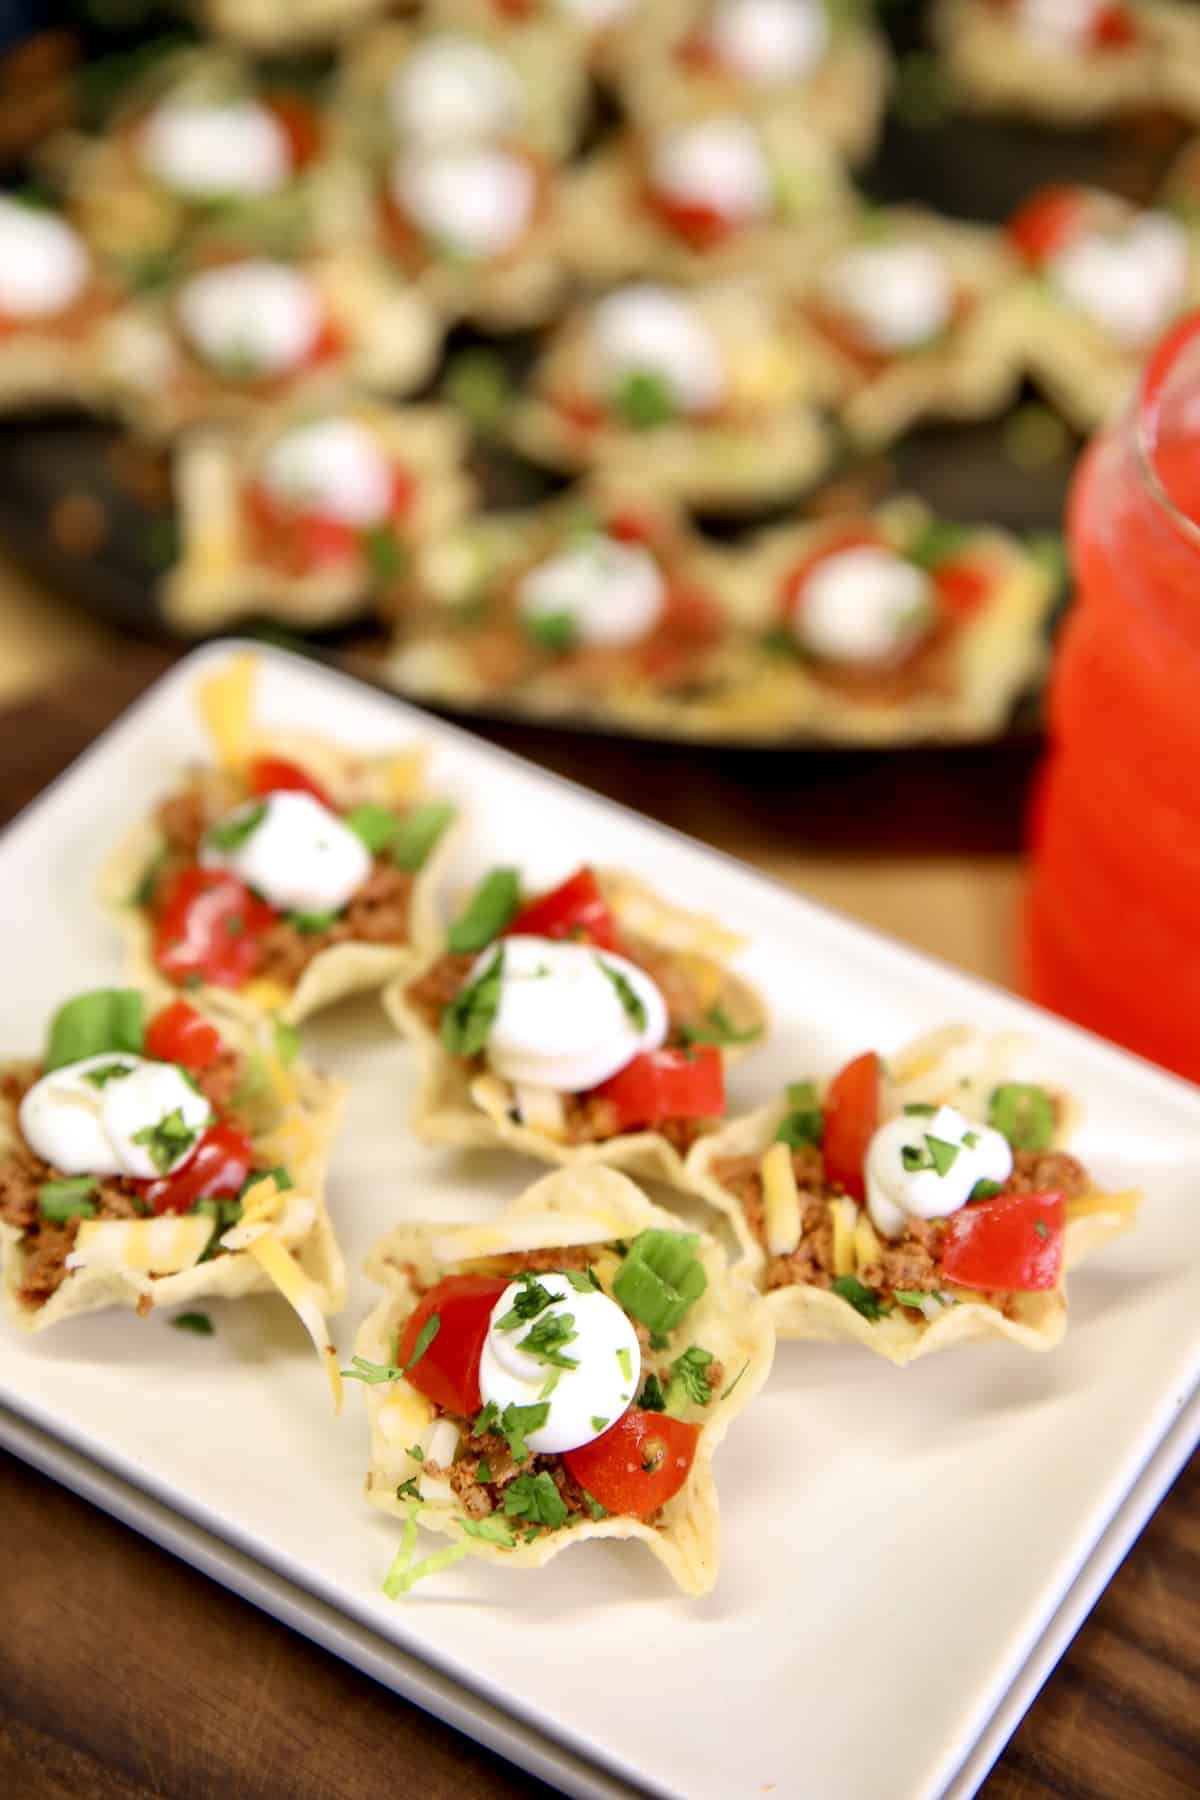 Appetizer plate with taco bites, topped with sour cream and tomatoes.